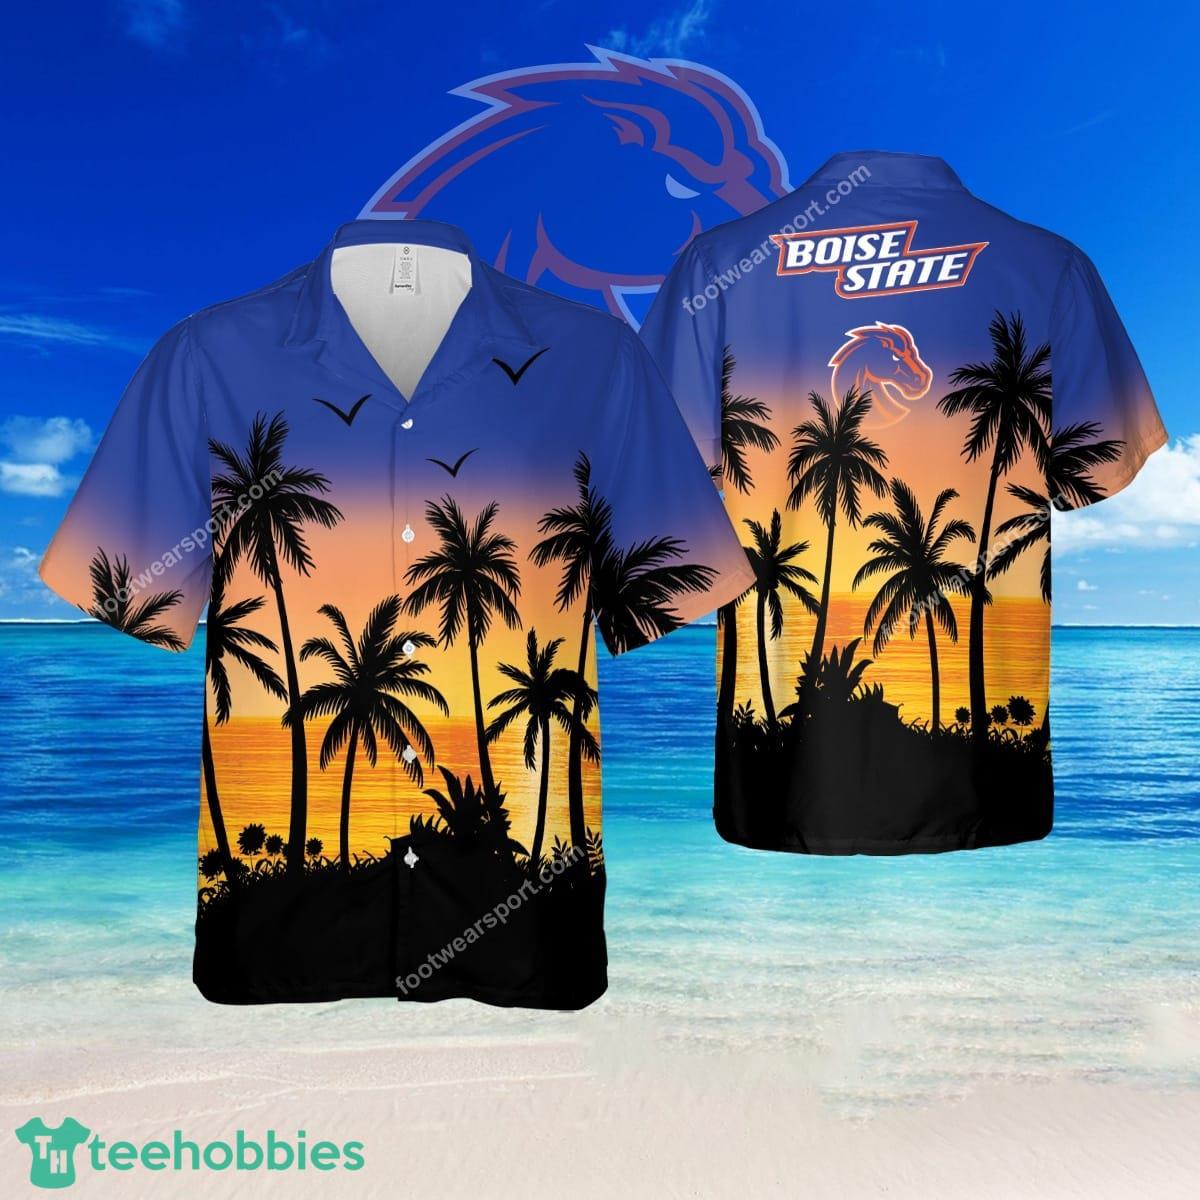 NCAA Boise State Broncos Limited Edition Brand 3D Hawaiian Shirt For Summer - NCAA Boise State Broncos Limited Edition Brand 3D Hawaiian Shirt For Summer